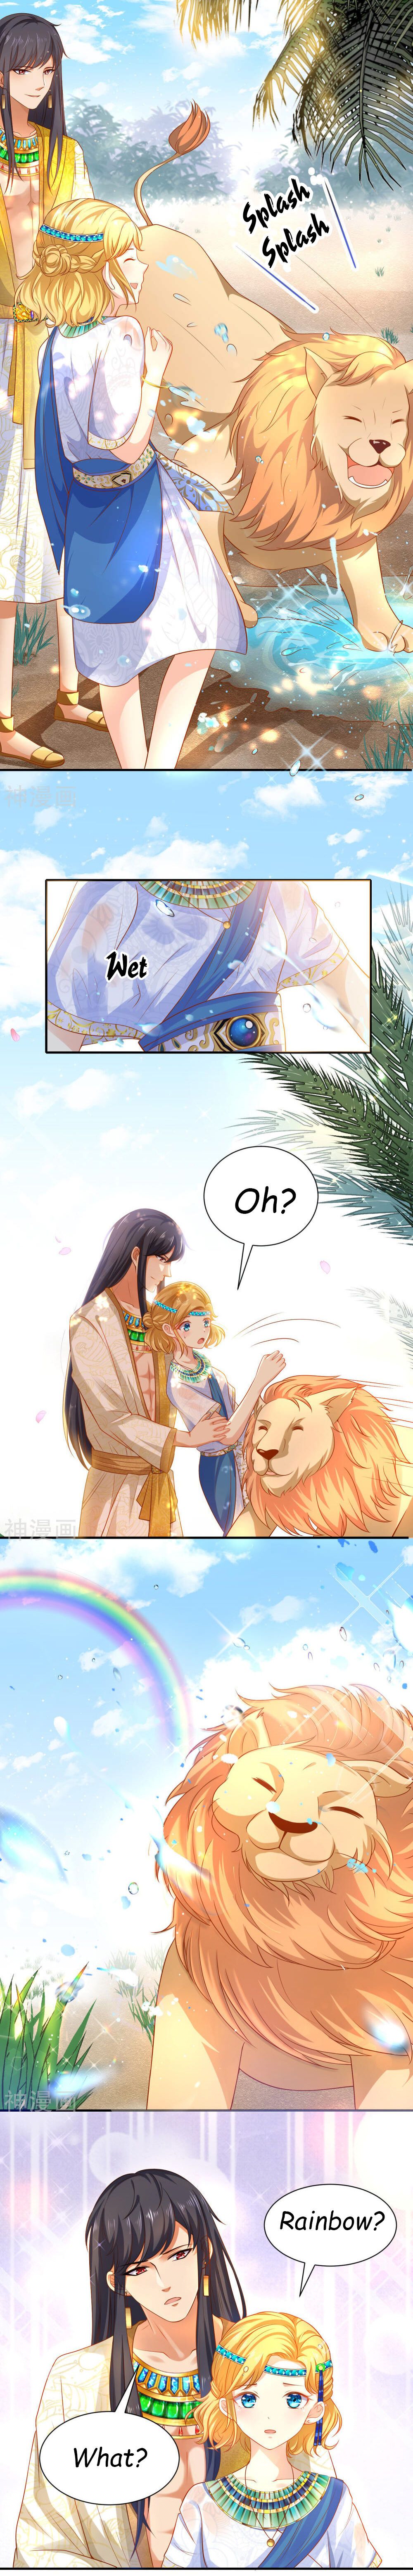 Pharaoh’s First Favorite Queen chapter 4